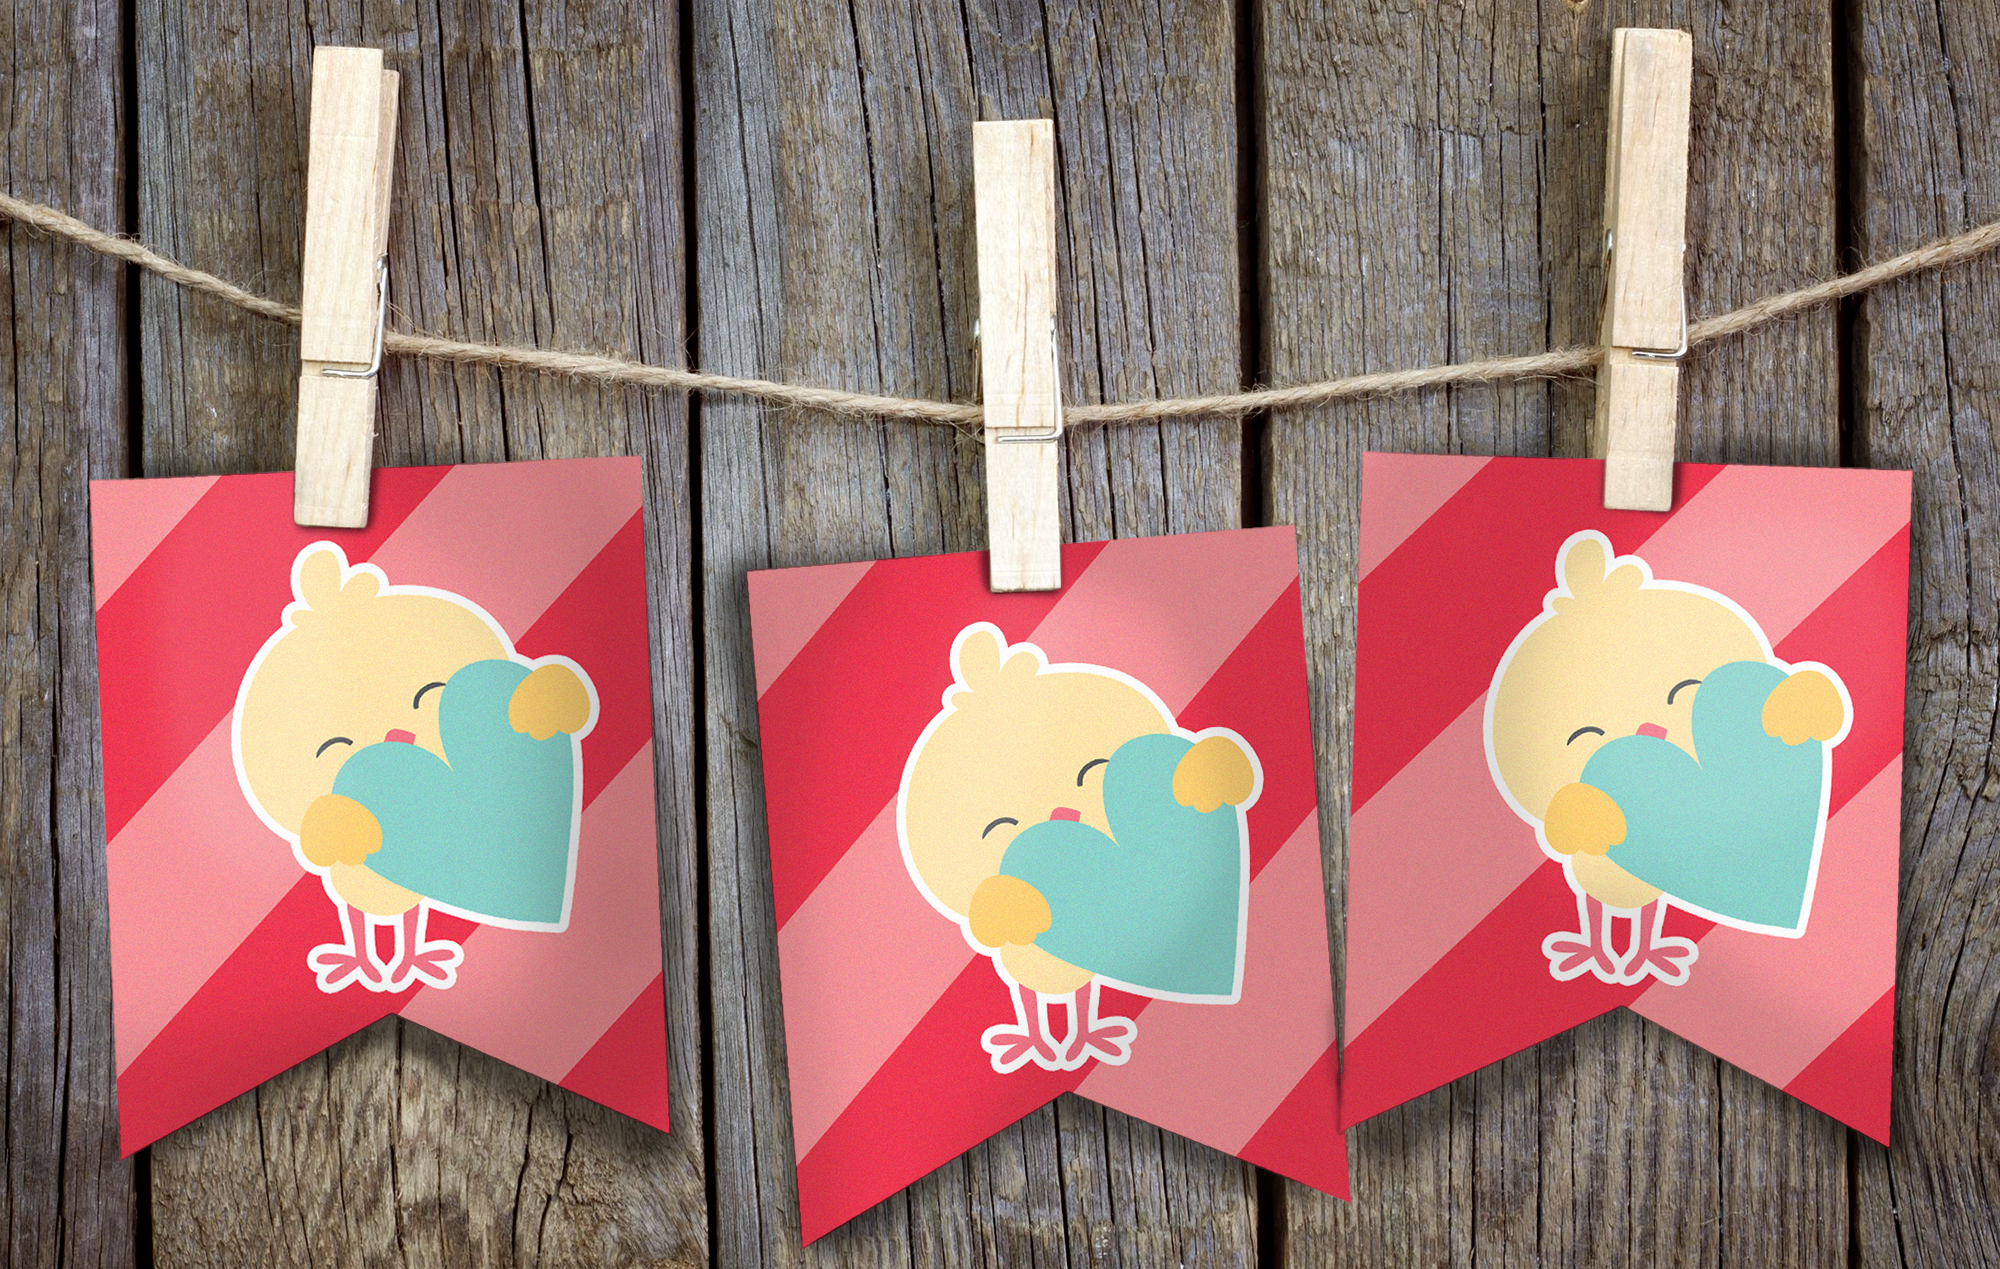 A cute Valentines Chick Banner on a rope with clothespins